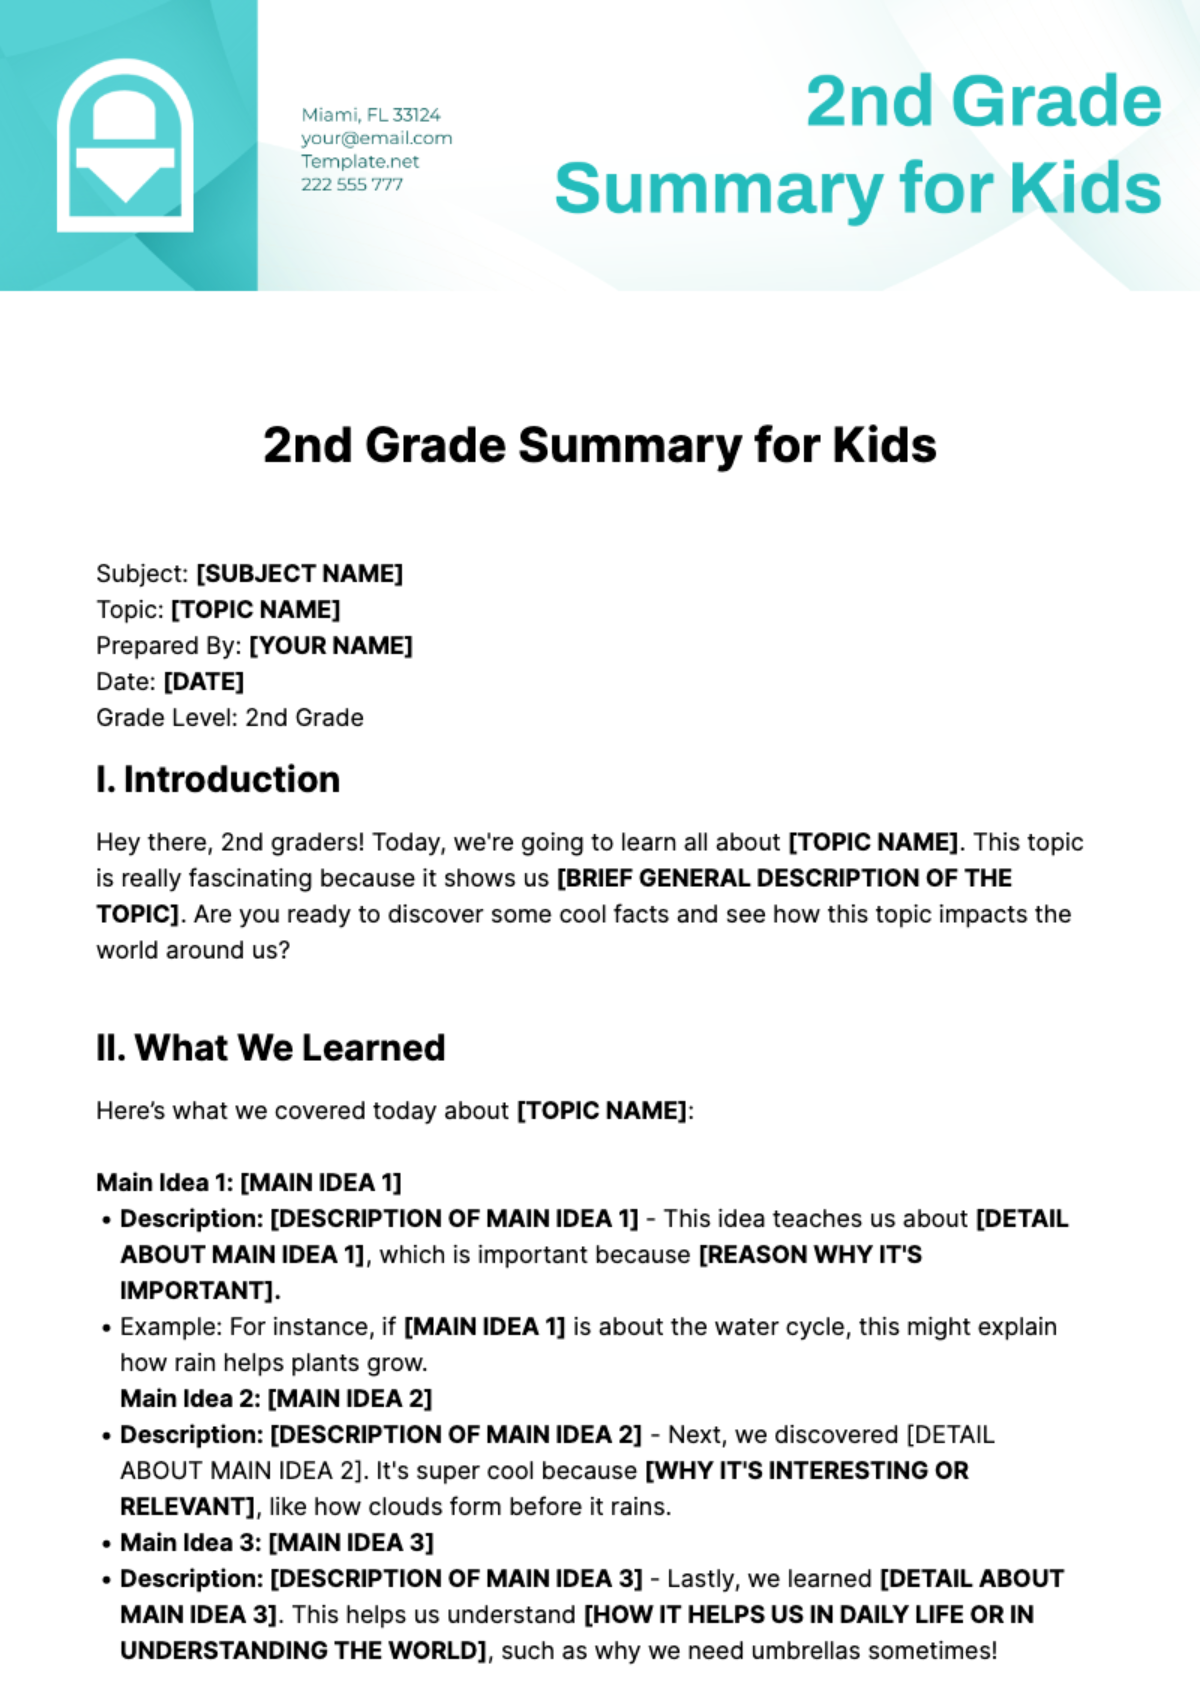 Free 2nd Grade Summary for Kids Template